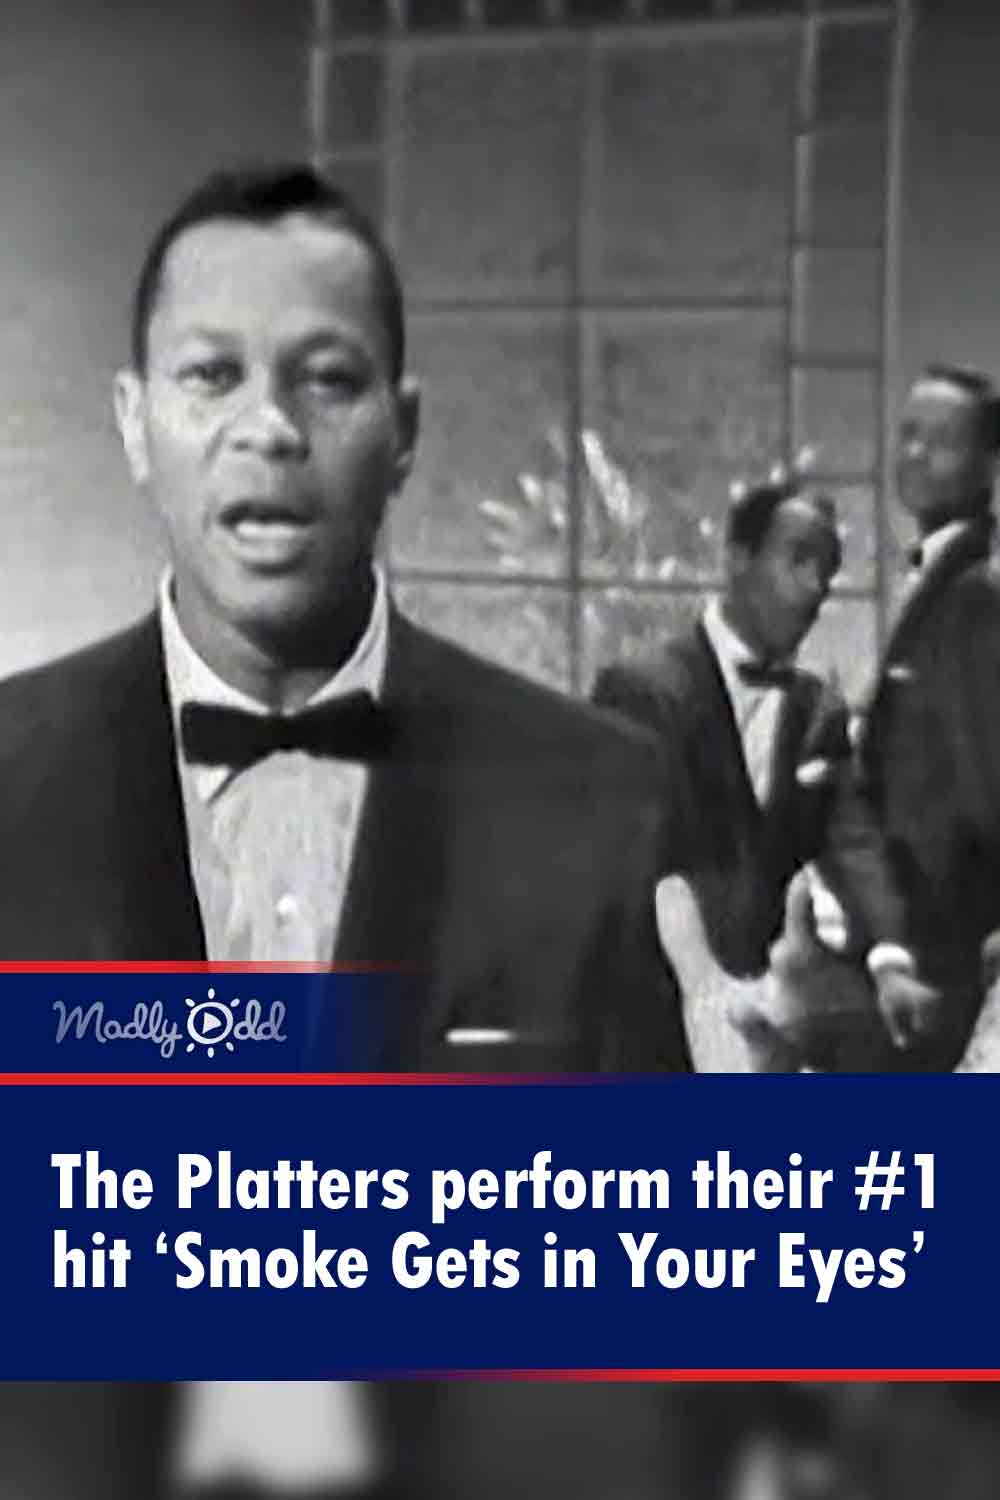 The Platters perform their #1 hit ‘Smoke Gets in Your Eyes’